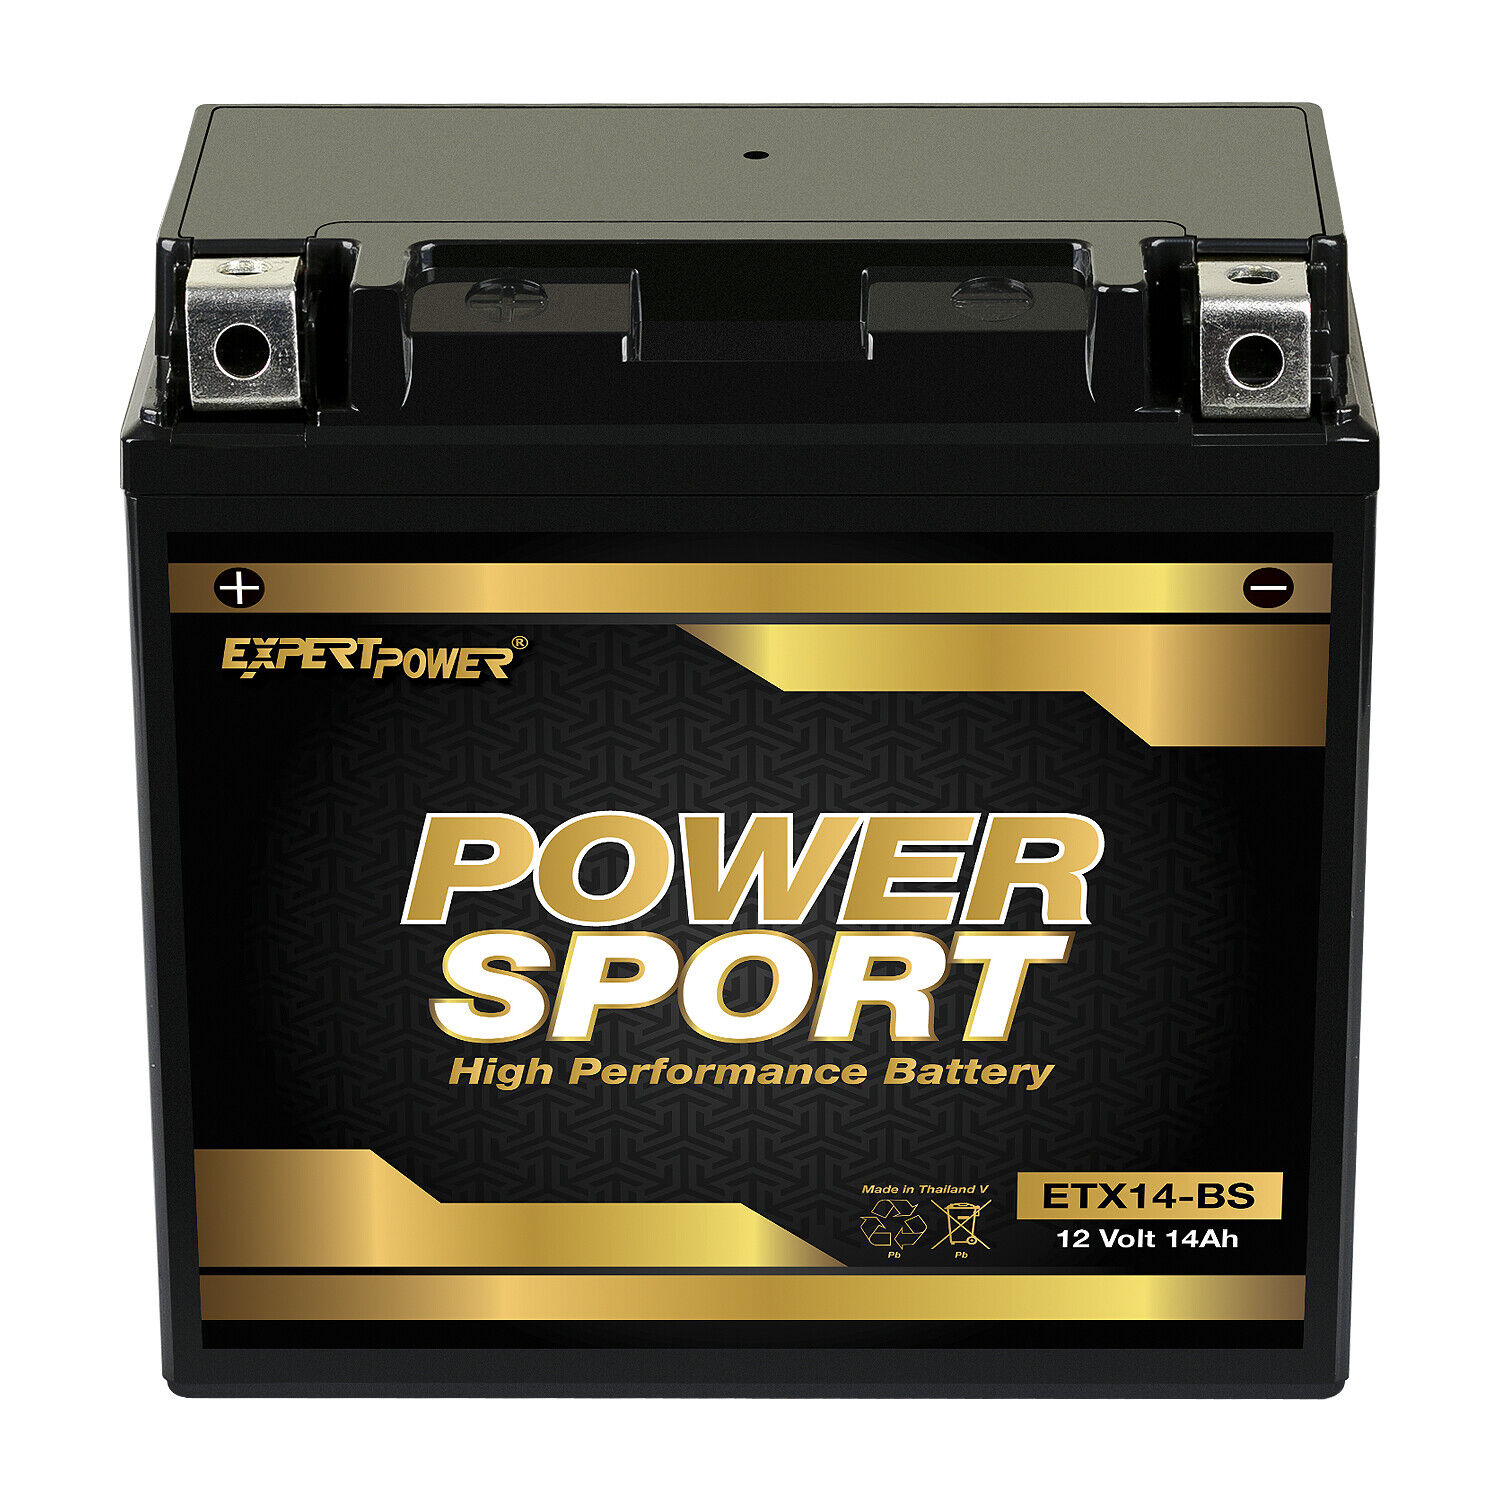 YTX14-BS Replacement for 2000-2006 Honda TRX350 Rancher Battery